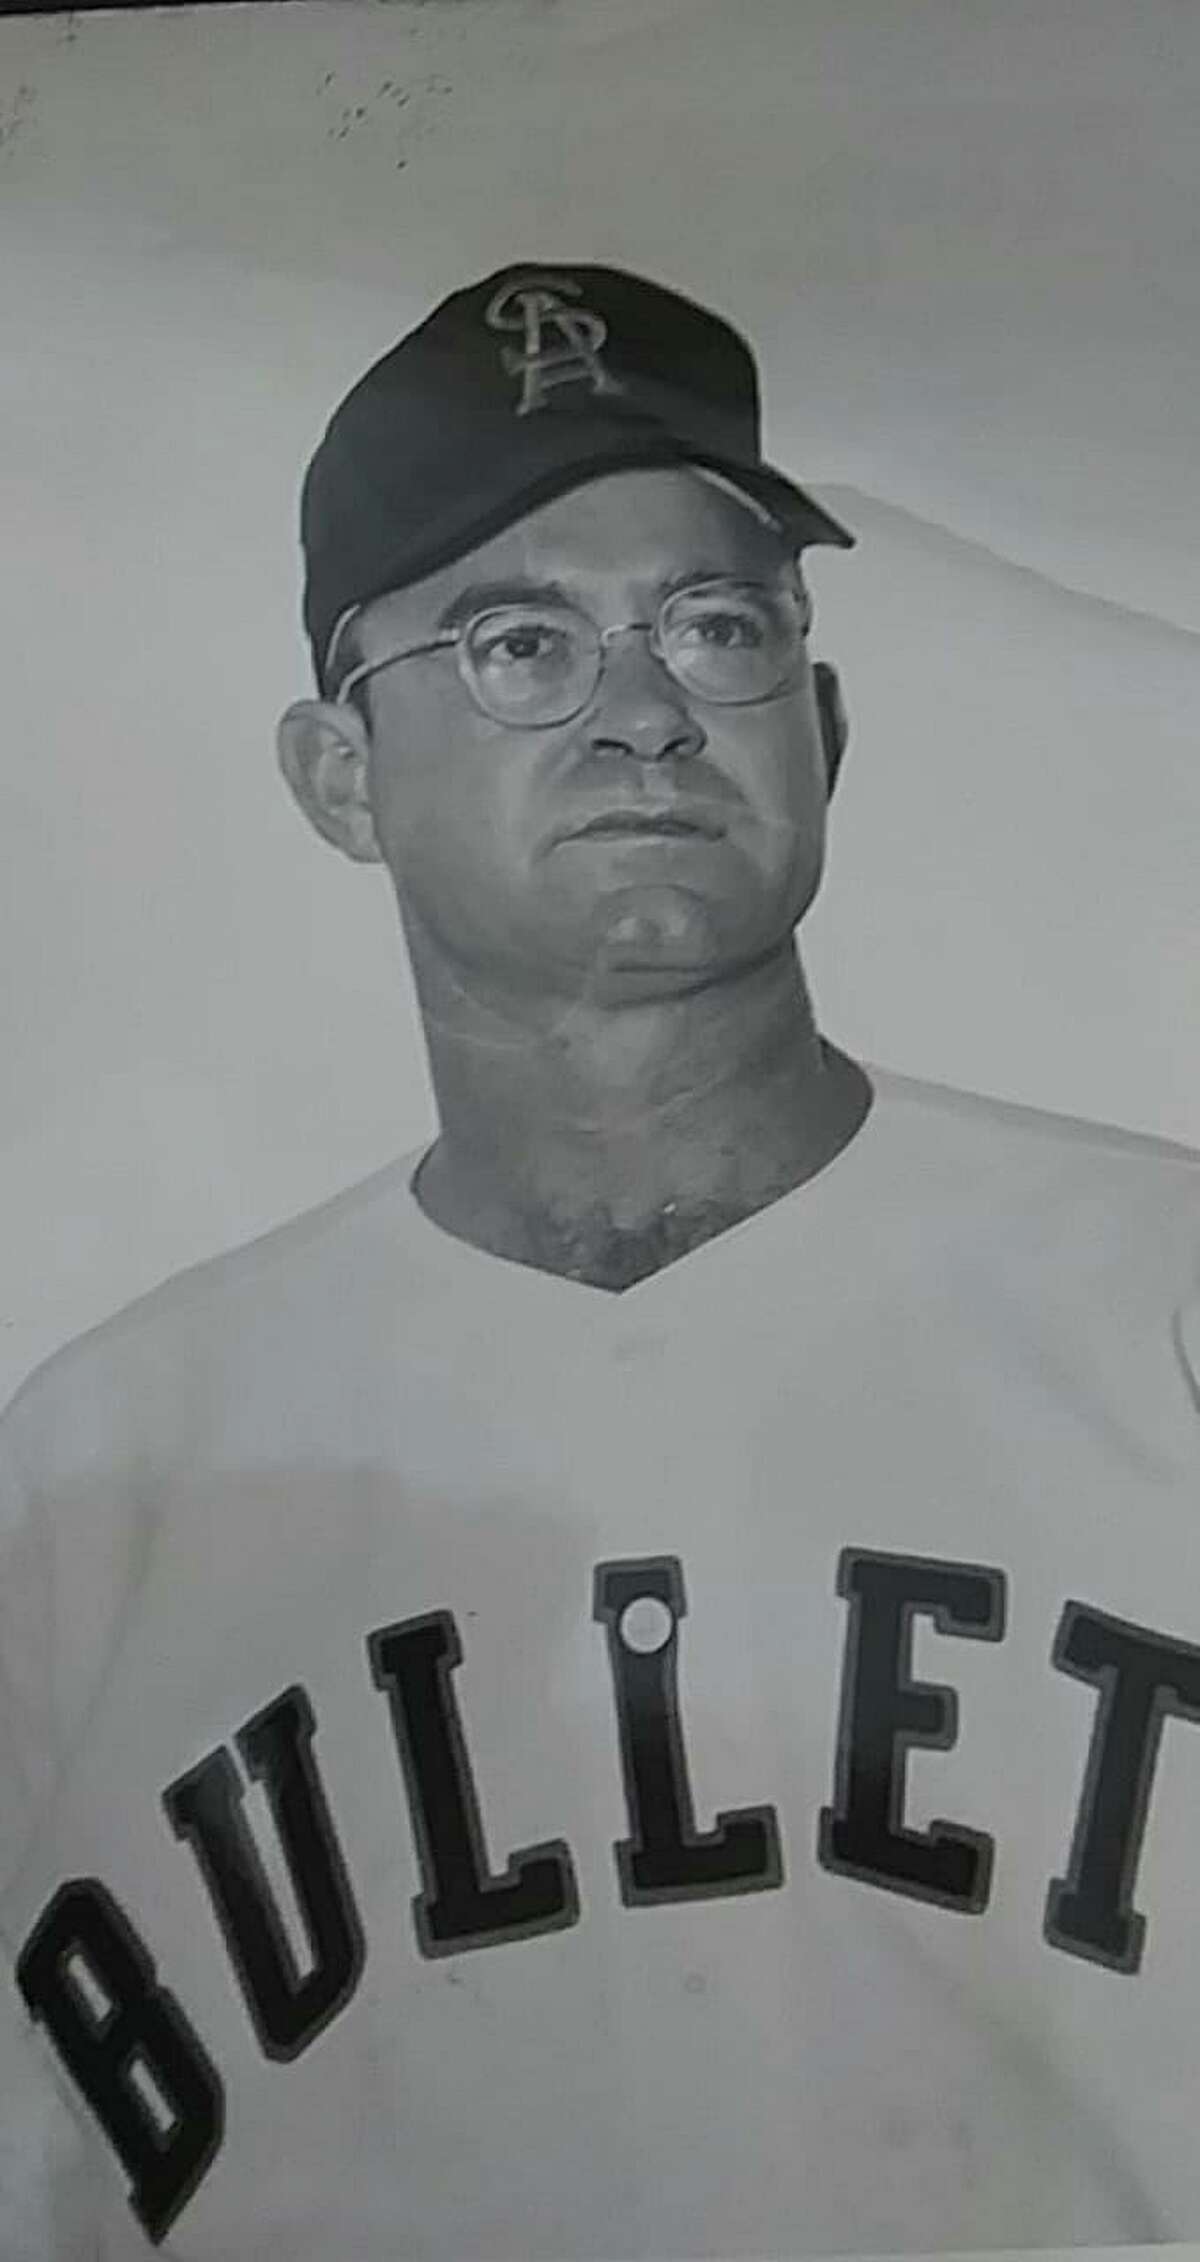 Clint Courtney, a one-time Major League baseball player, was a player-coach and occasional backup catcher for the short-lived San Antonio Bullets minor league team. It was affiliated with the Houston Colt .45s, which later became the Houston Astros. The Bullets existed for only two years, 1963 and 1964.